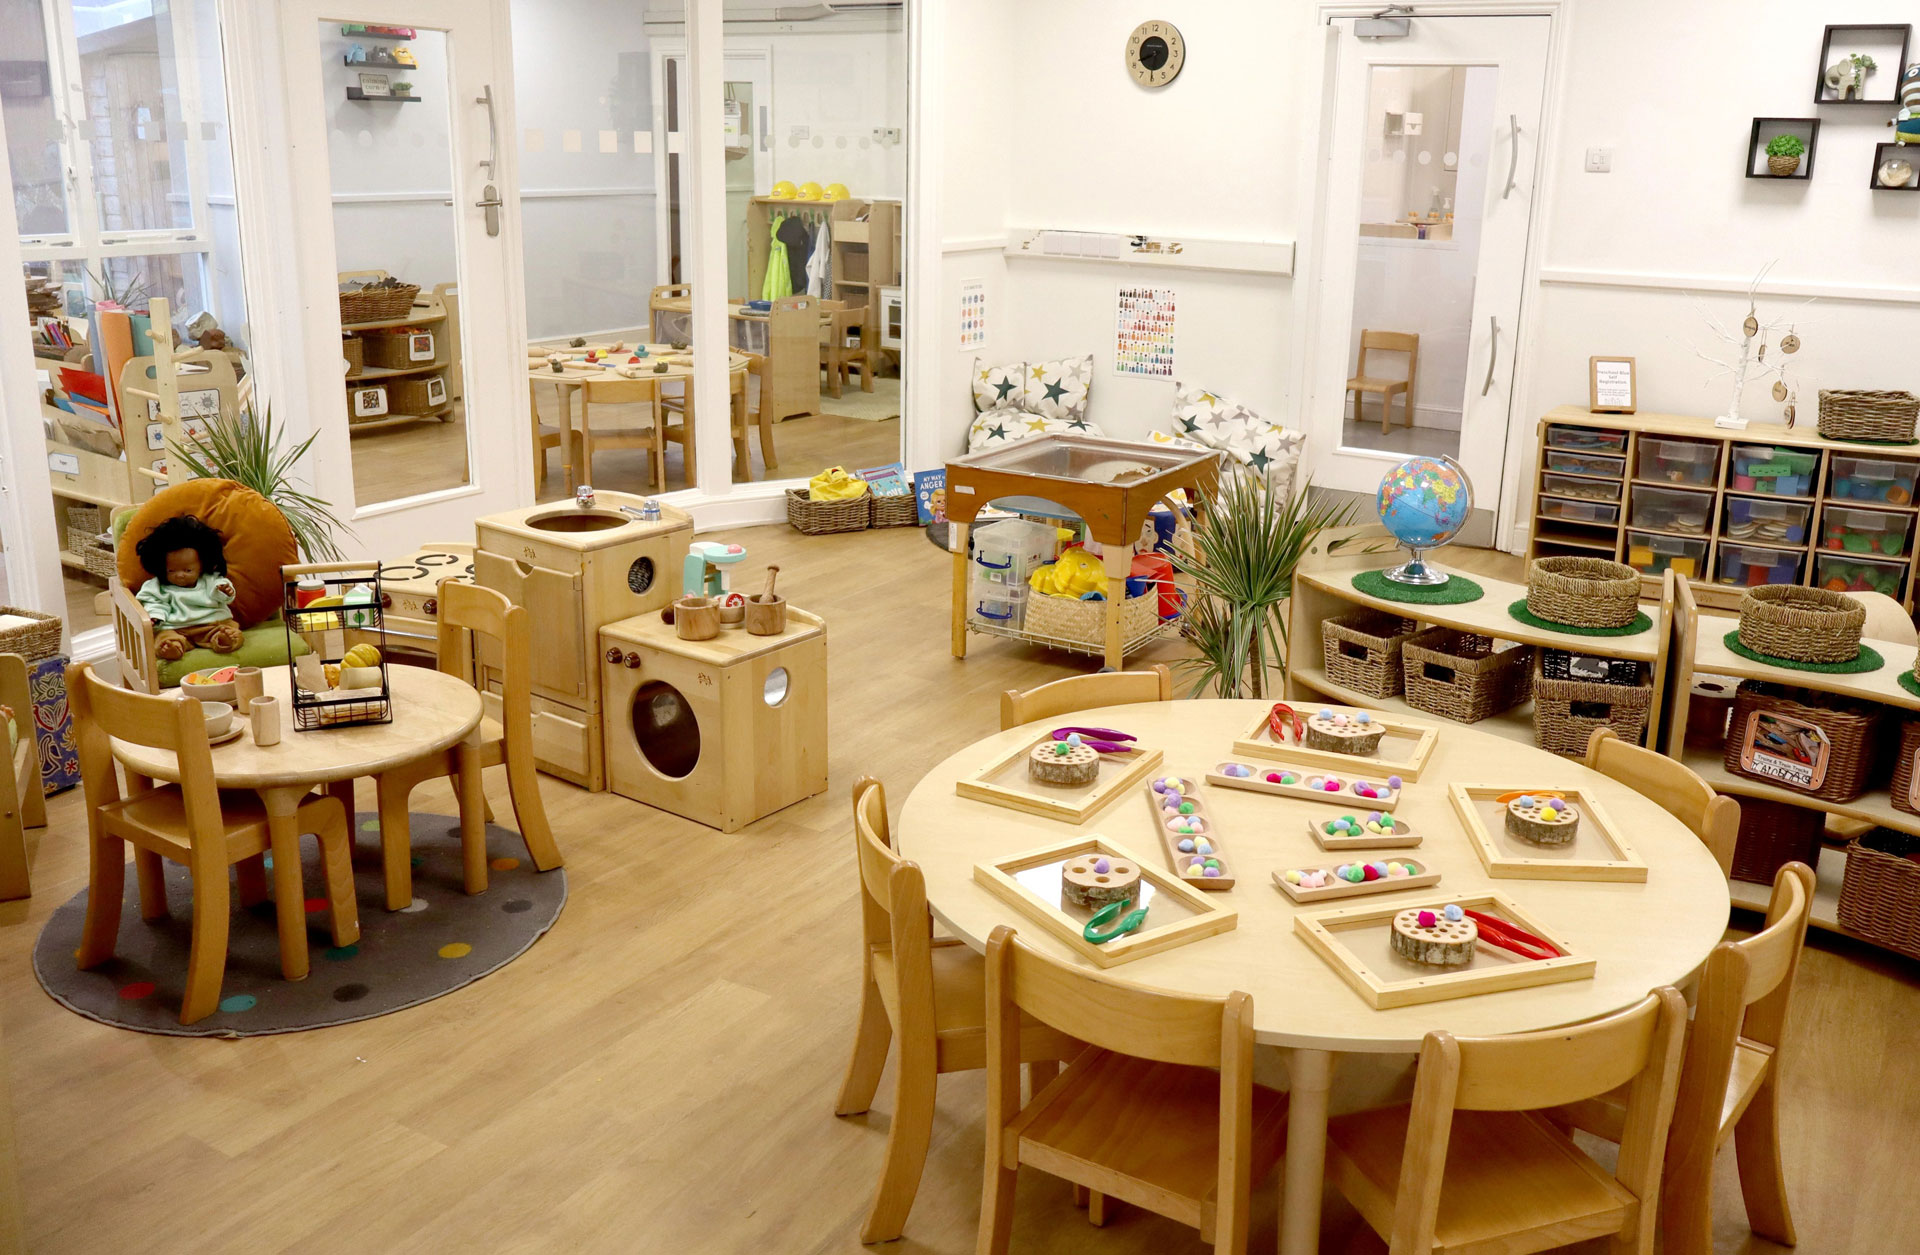 Crouch End Fields Day Nursery and Preschool room